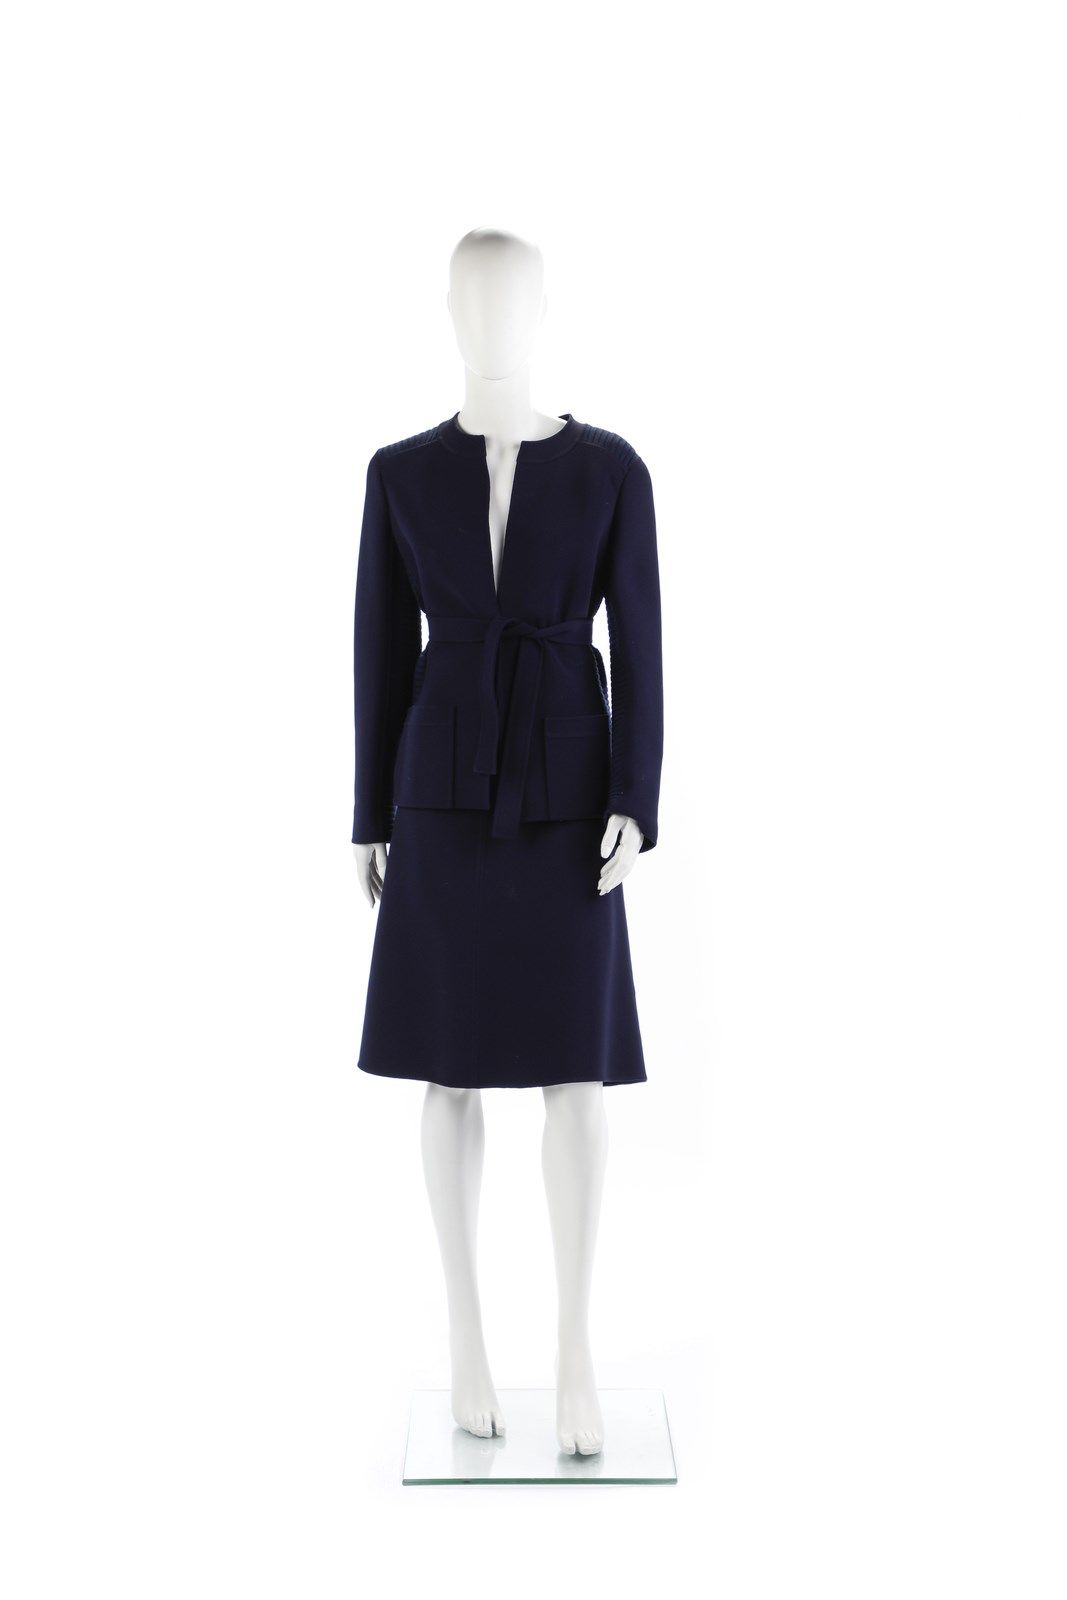 MILA SCHON Dark blue skirt and jacket with belt. Size46IT. Made in Italy. Dunkel&hellip;